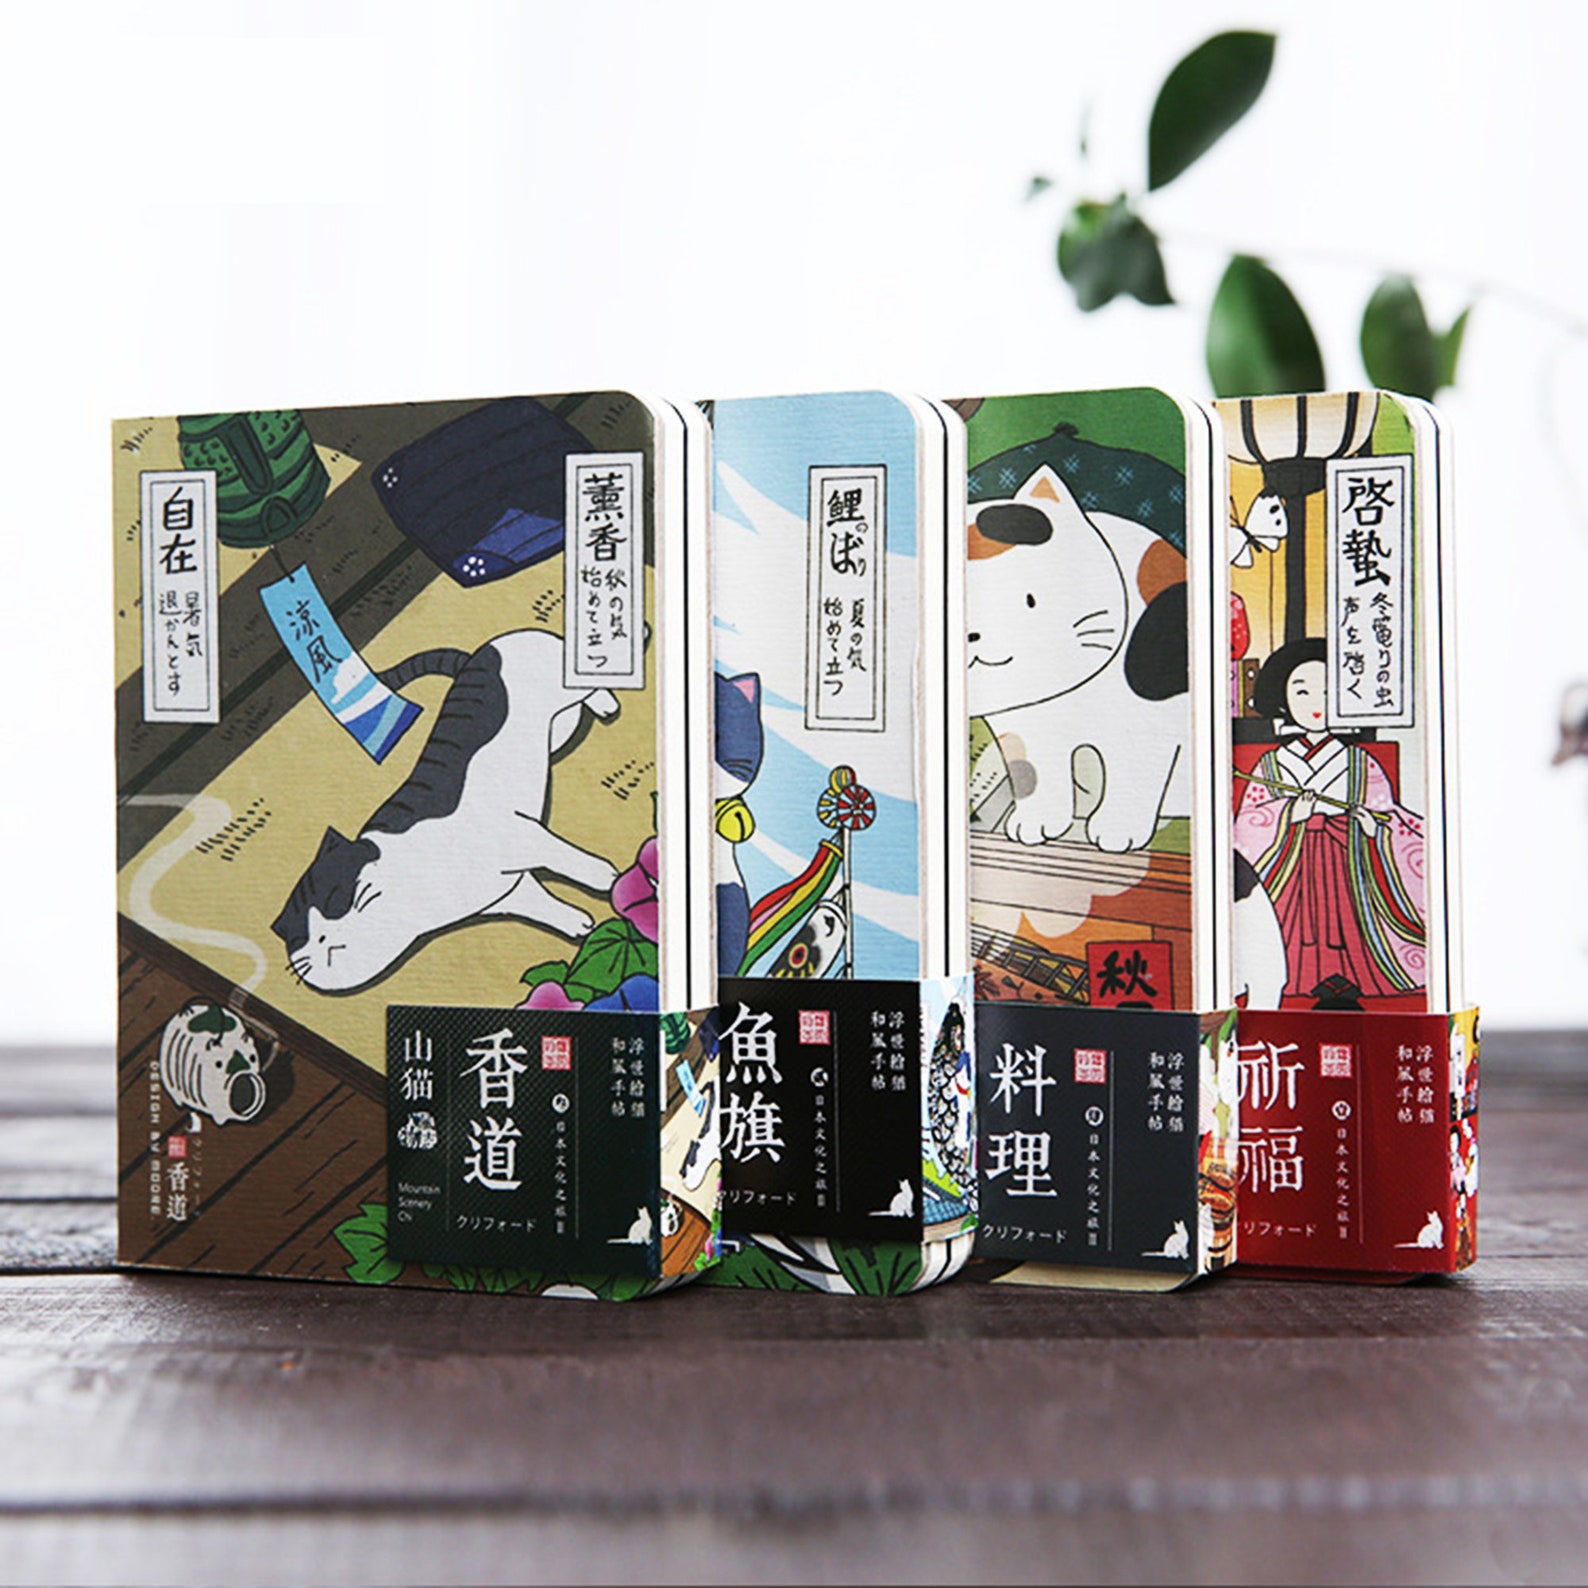 Four notebooks. They are designed in Japanese anime style and all feature cats. 